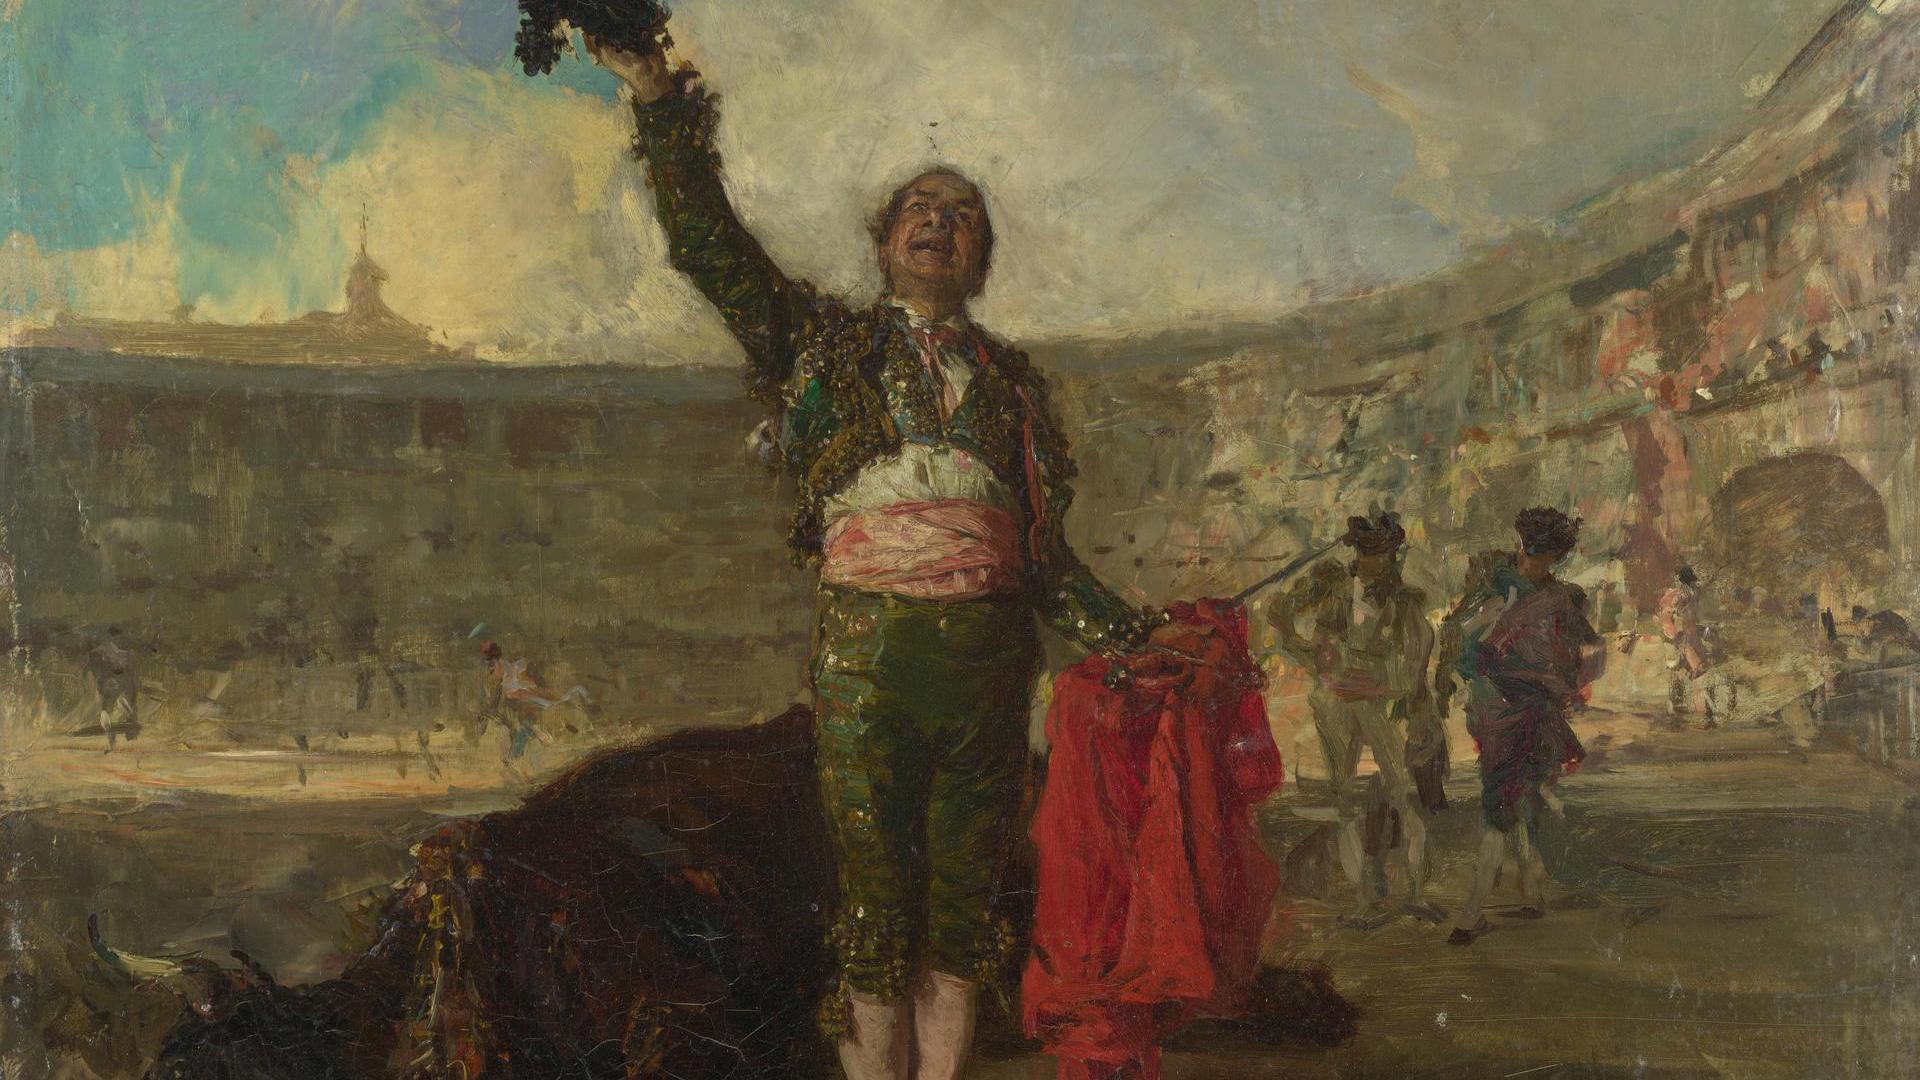 The Bullfighter's Salute by Mariano Fortuny